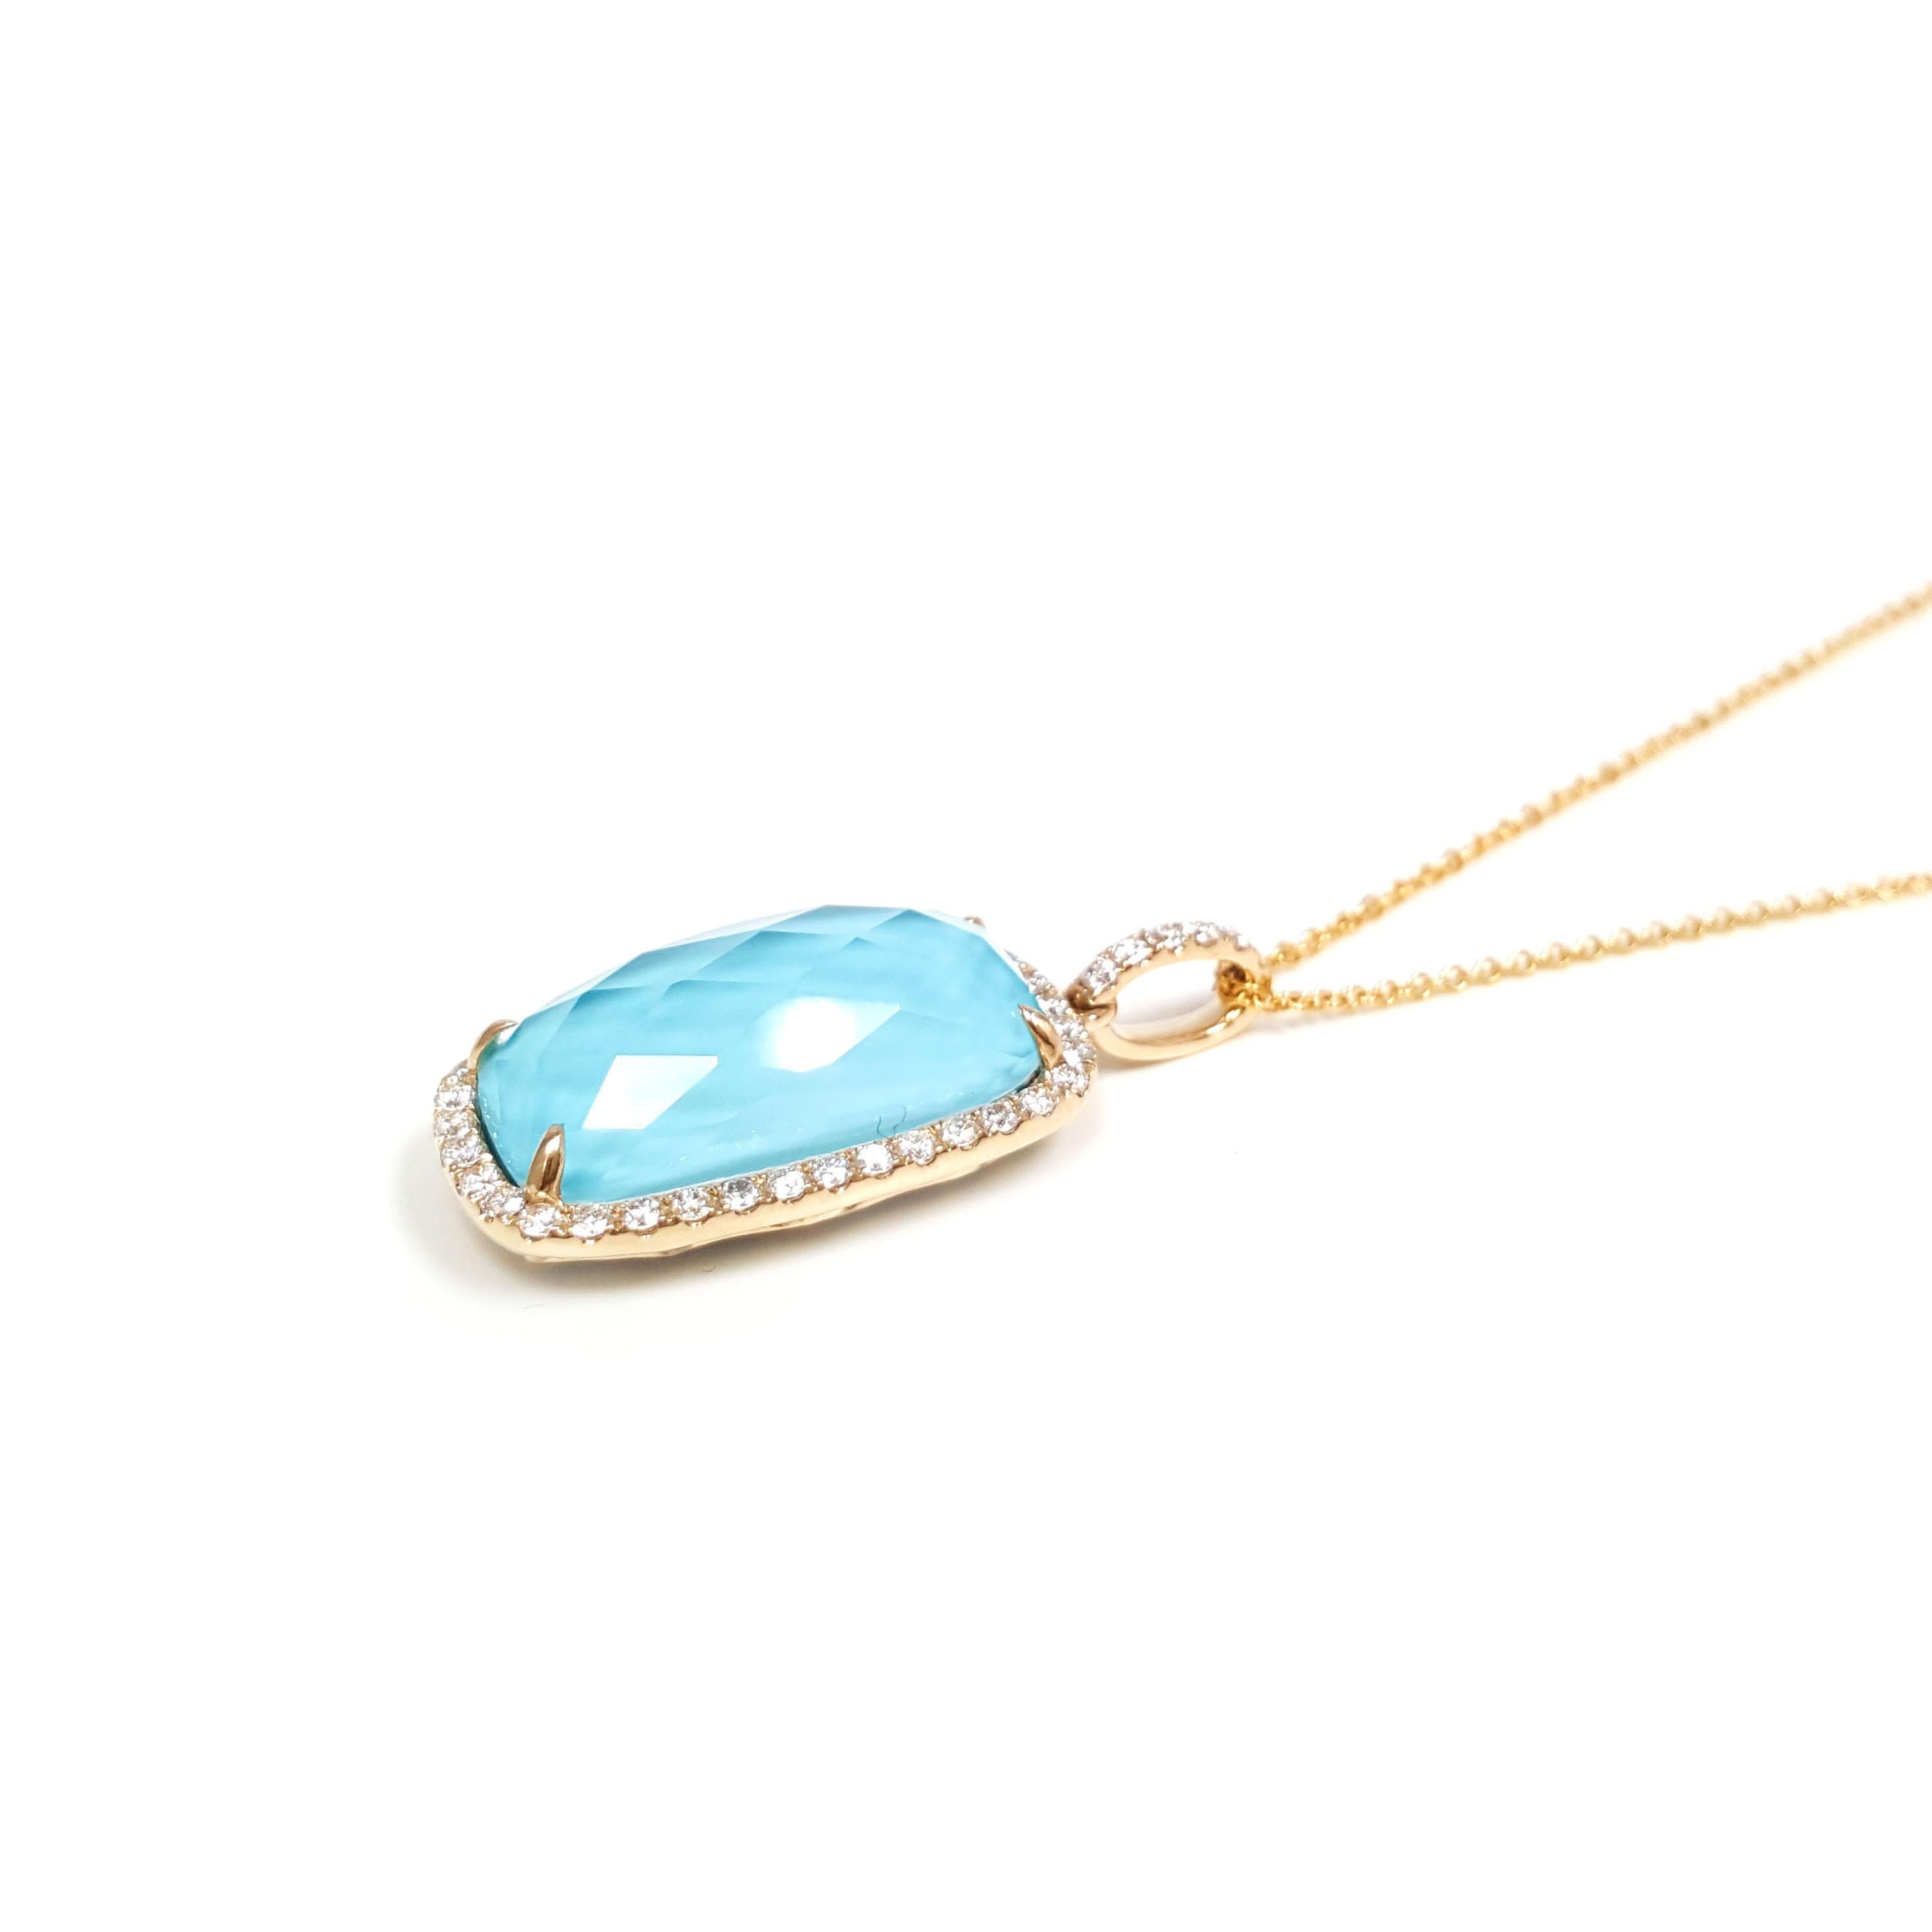 This ladies 14k yellow gold turquoise and round diamond pendant has 7.71ct turquoise and 0.34ct round diamonds. This pendant is truly charming and perfect for any special occasion.